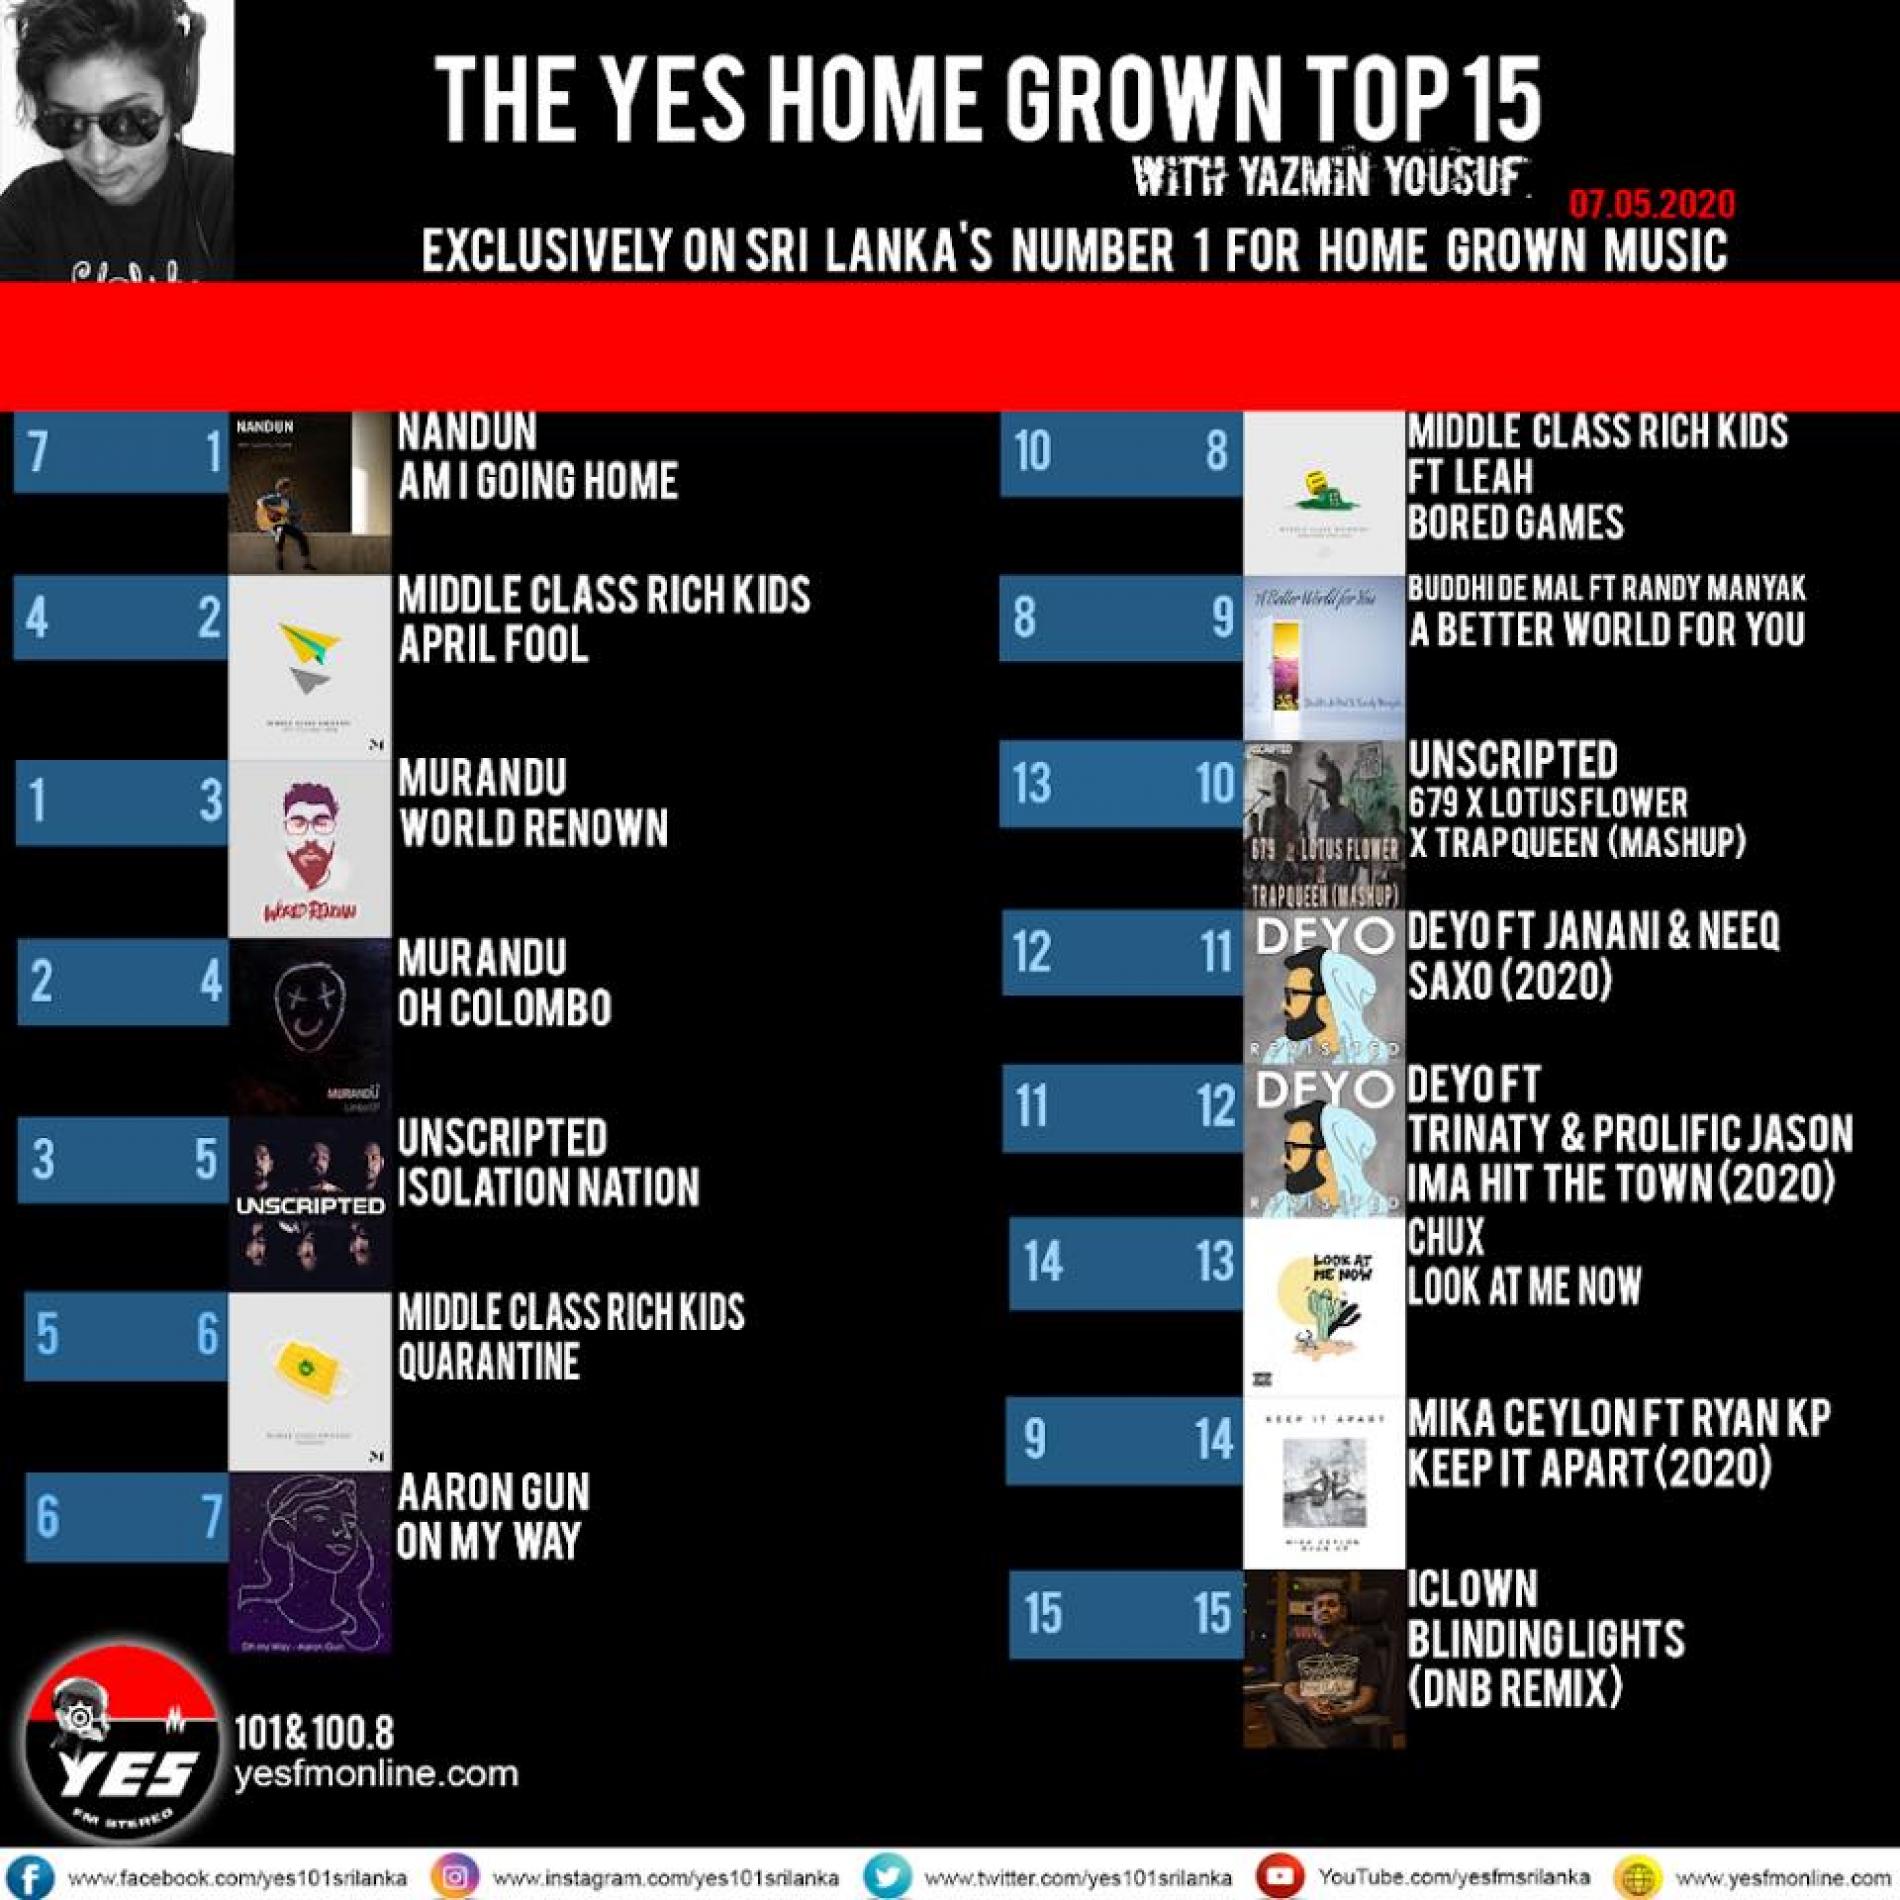 Nandun Hits Number 1 On The YES Home Grown Top 15